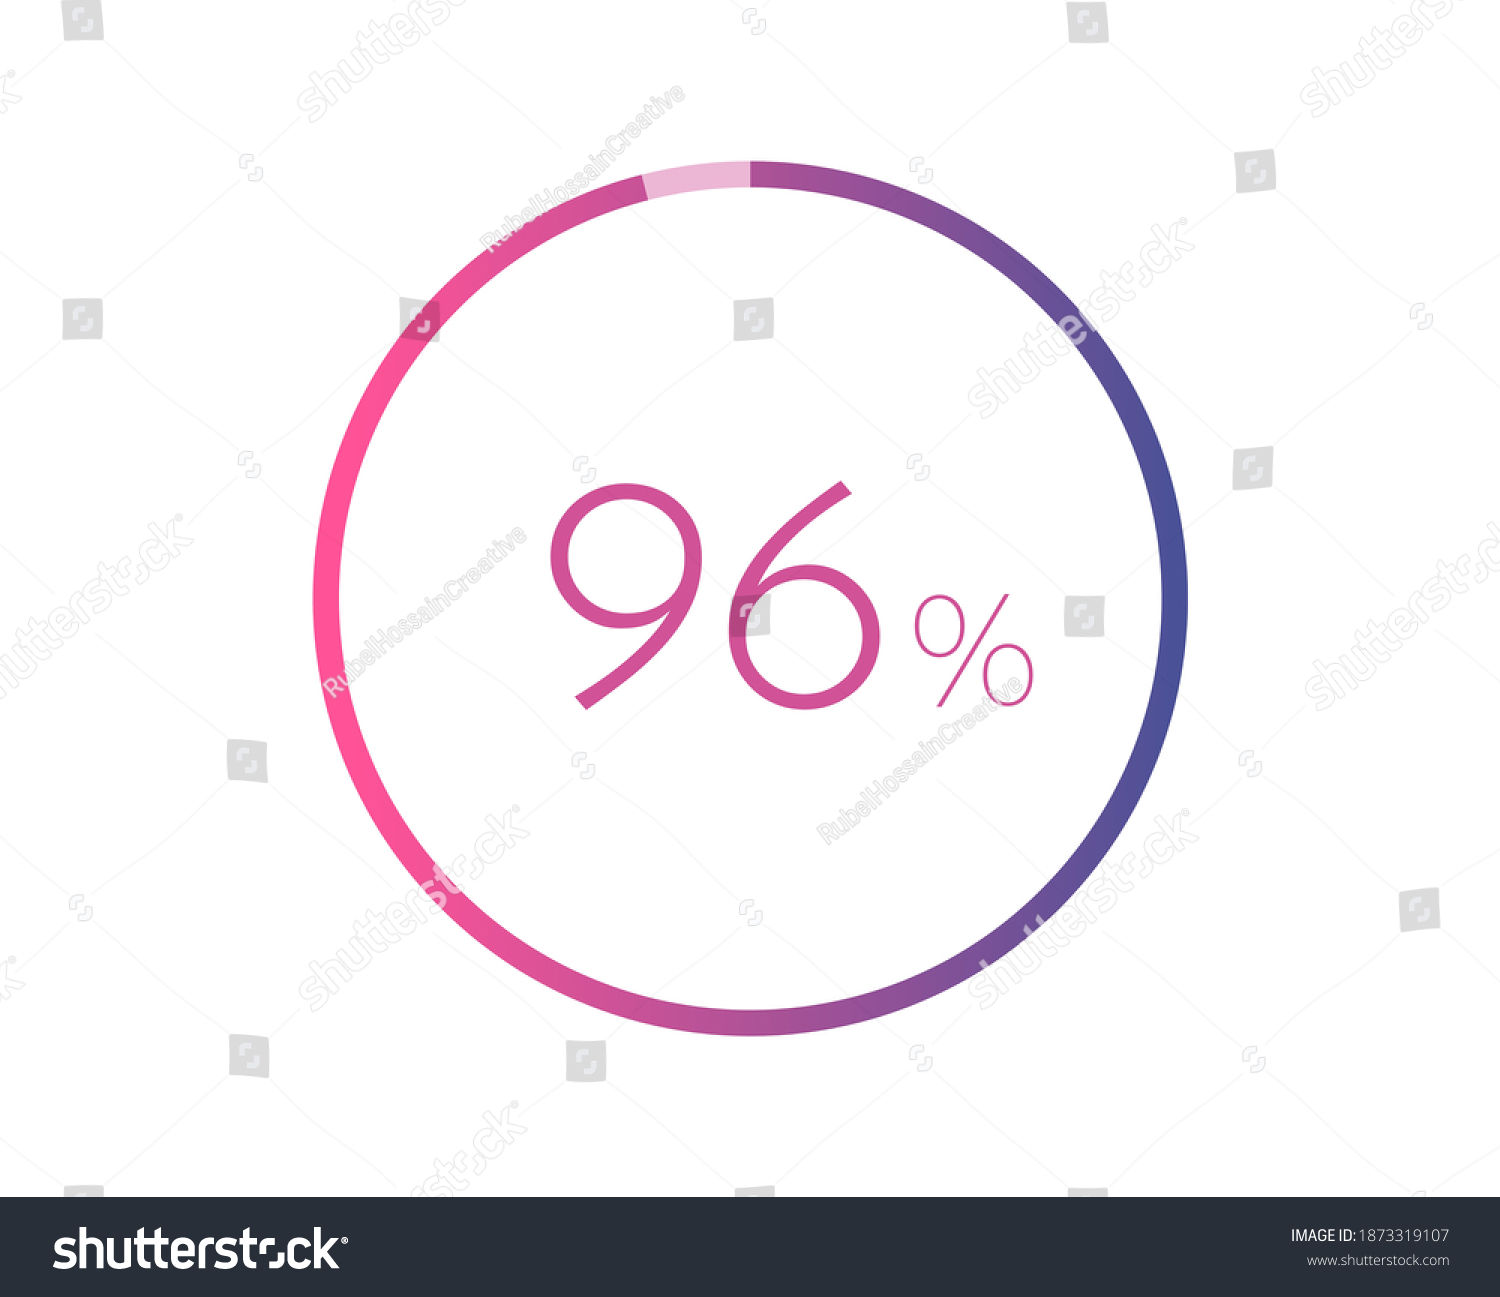 SVG of 96% percent circle chart symbol. 96 percentage Icons for business, finance, report, downloading svg